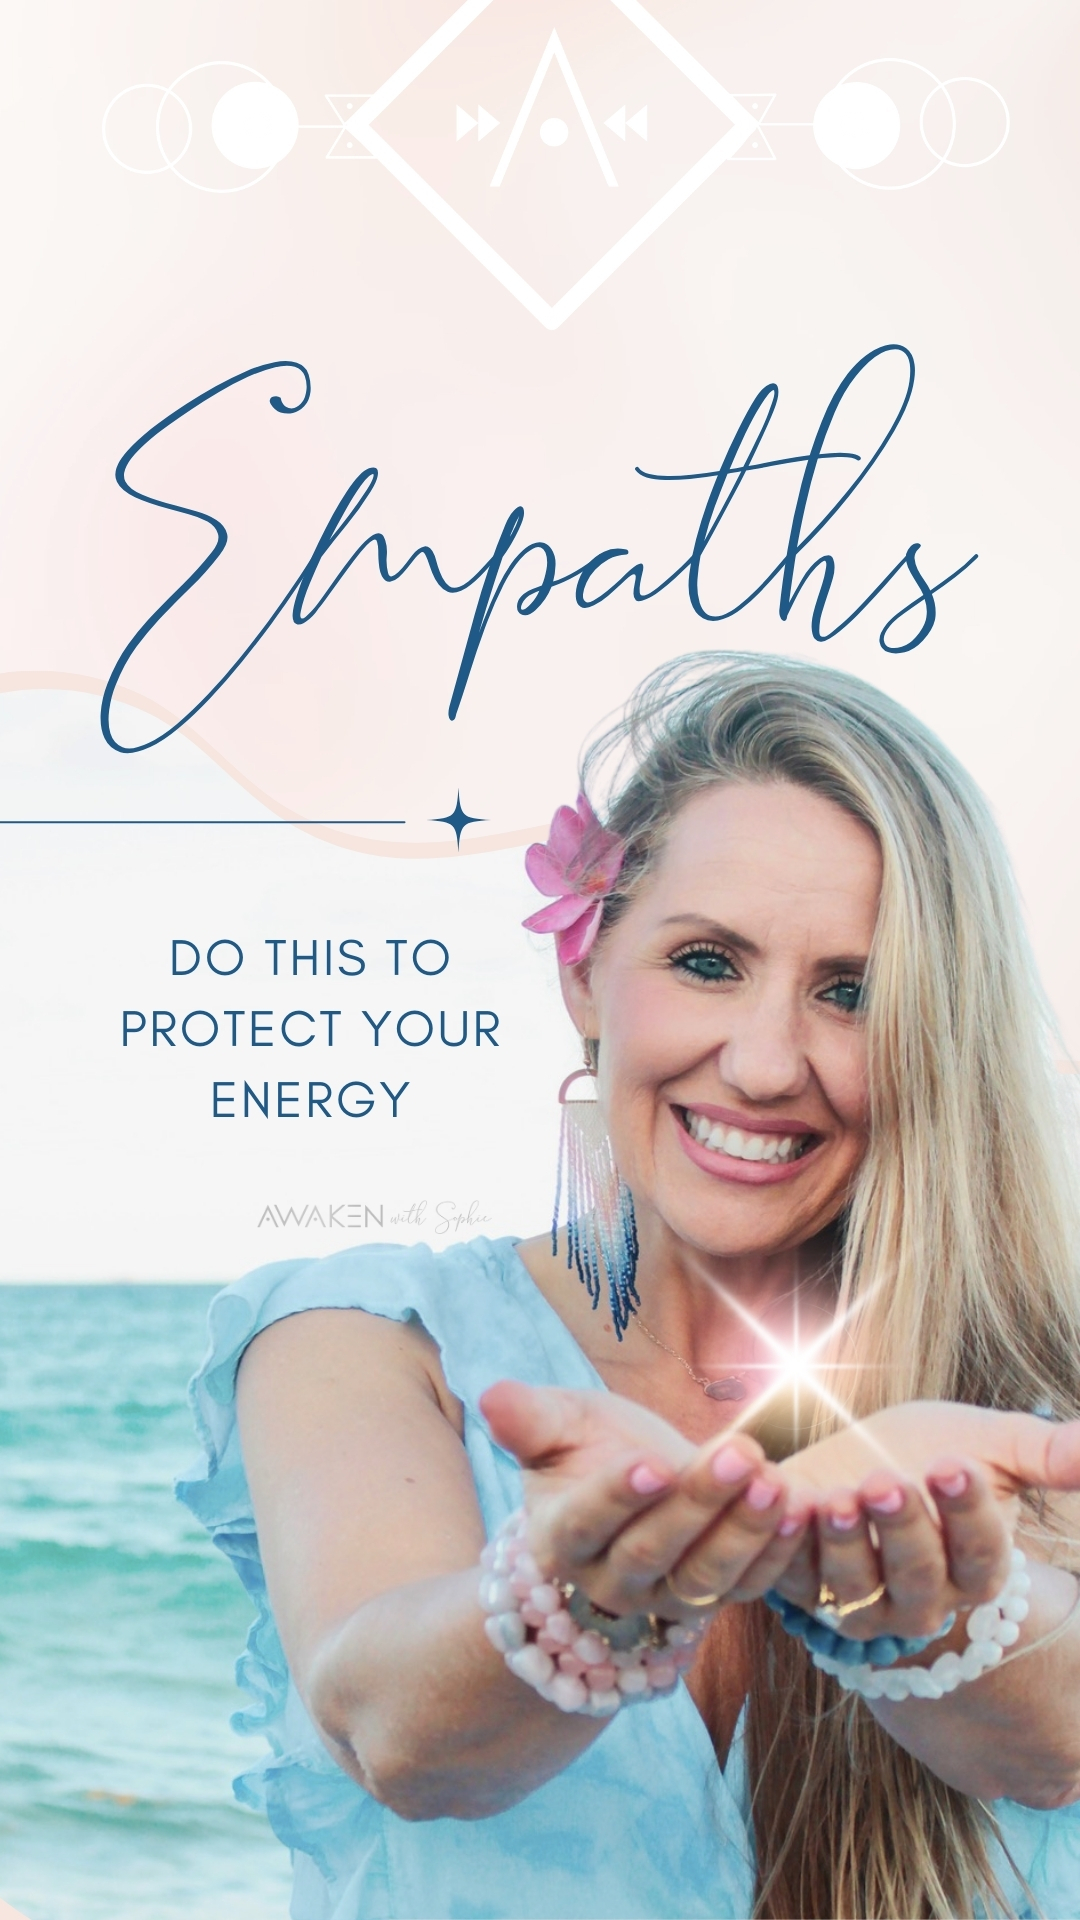 Empaths: Do This to Protect Your Energy article by Sophie Frabotta